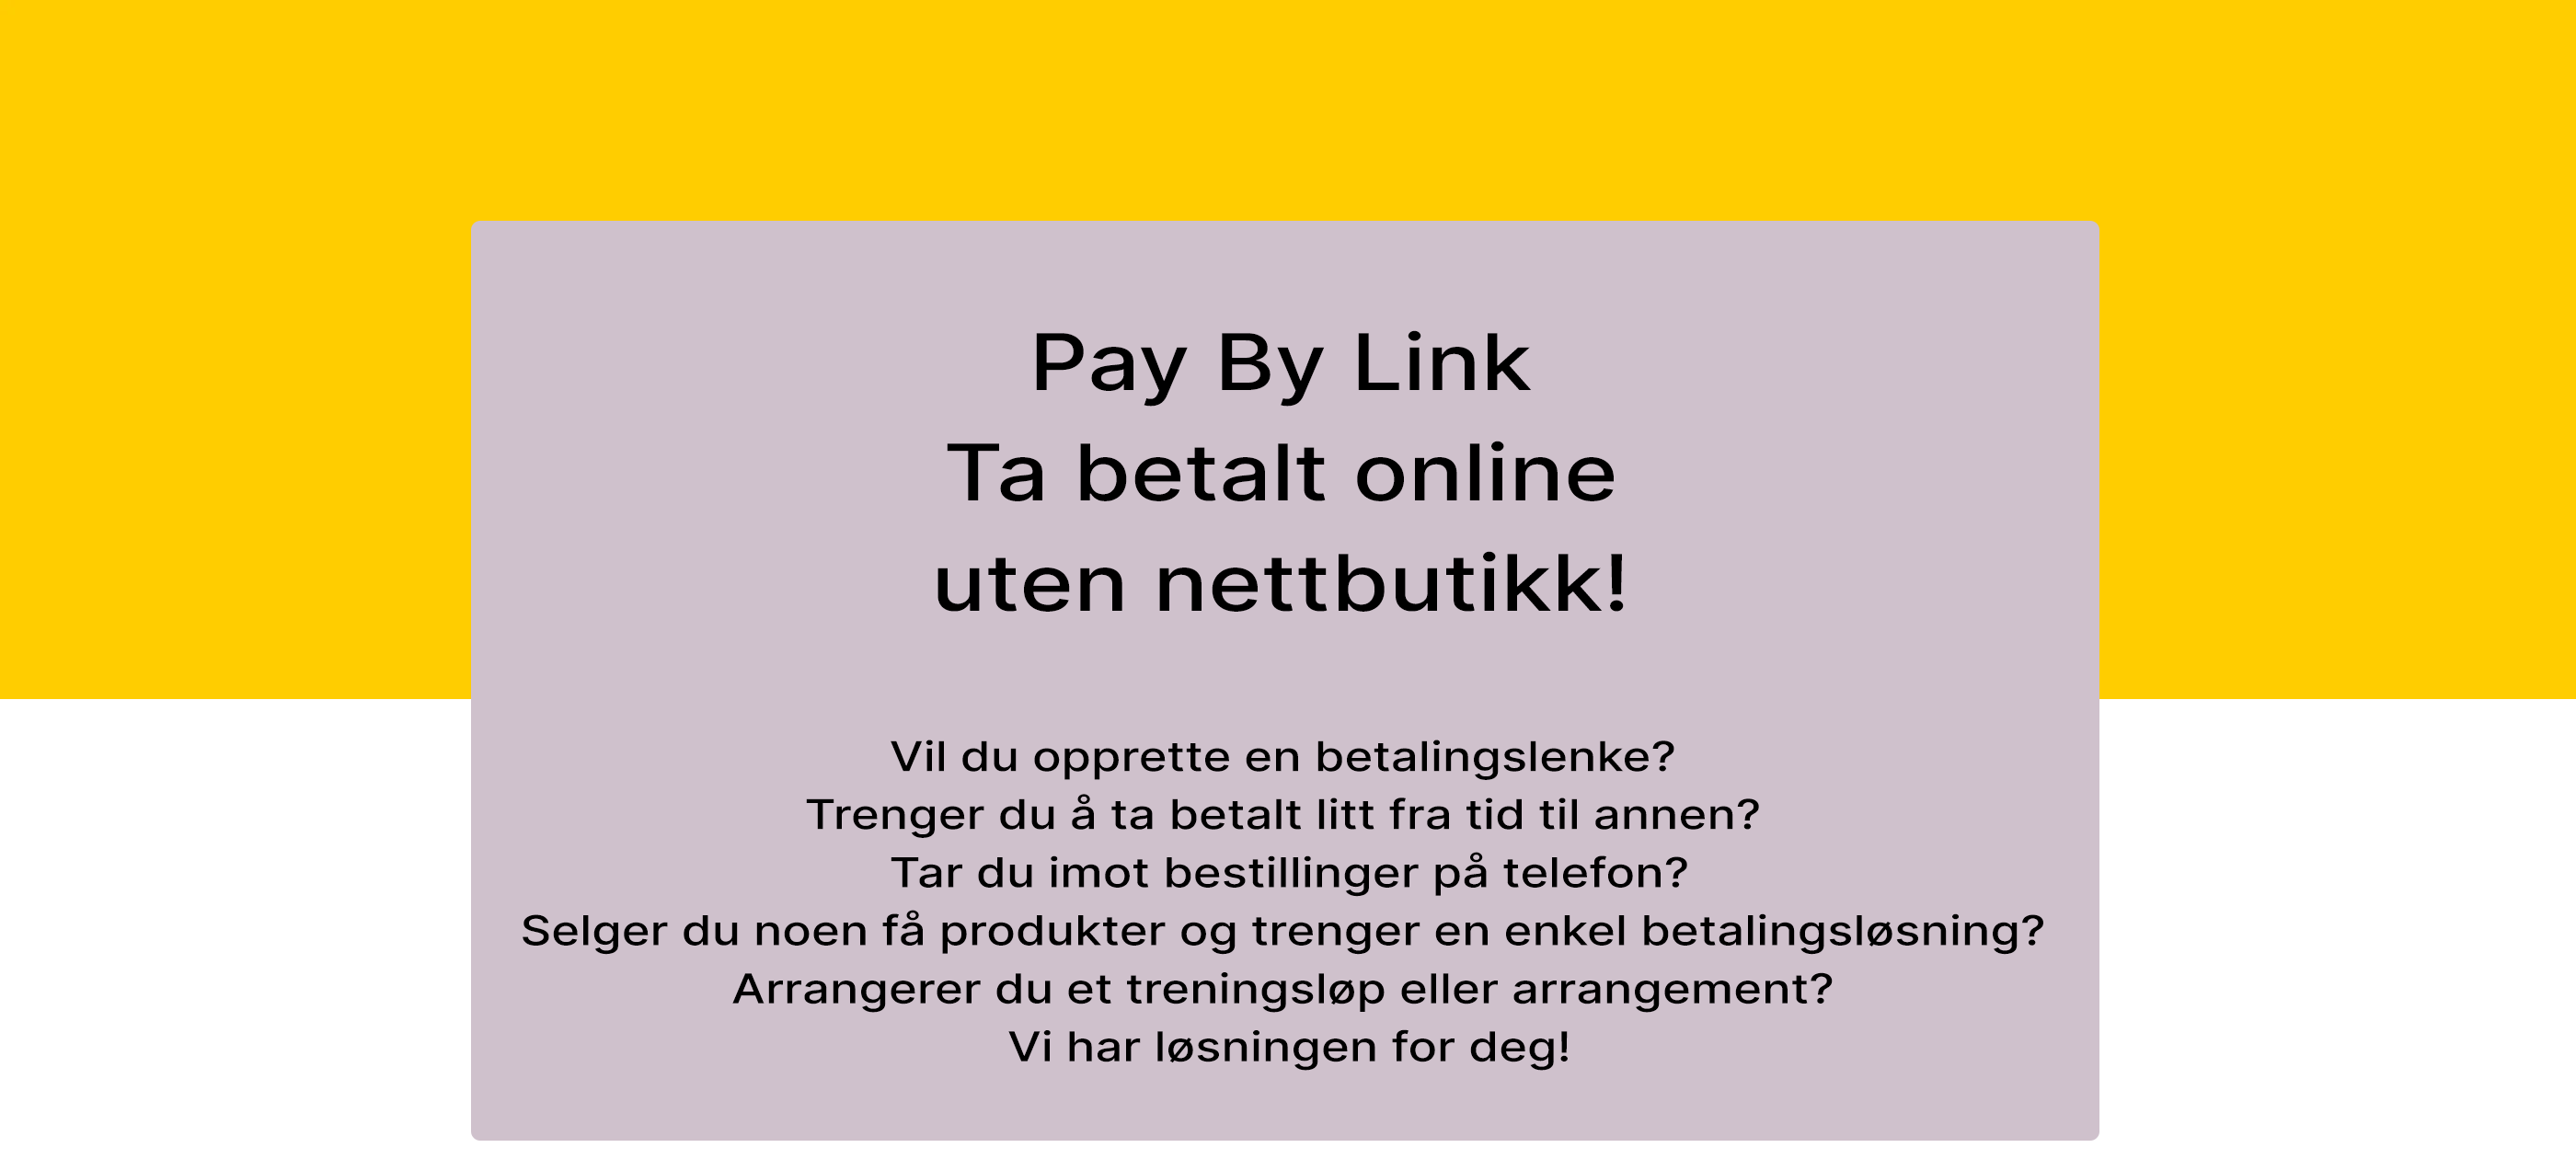 Pay By Link